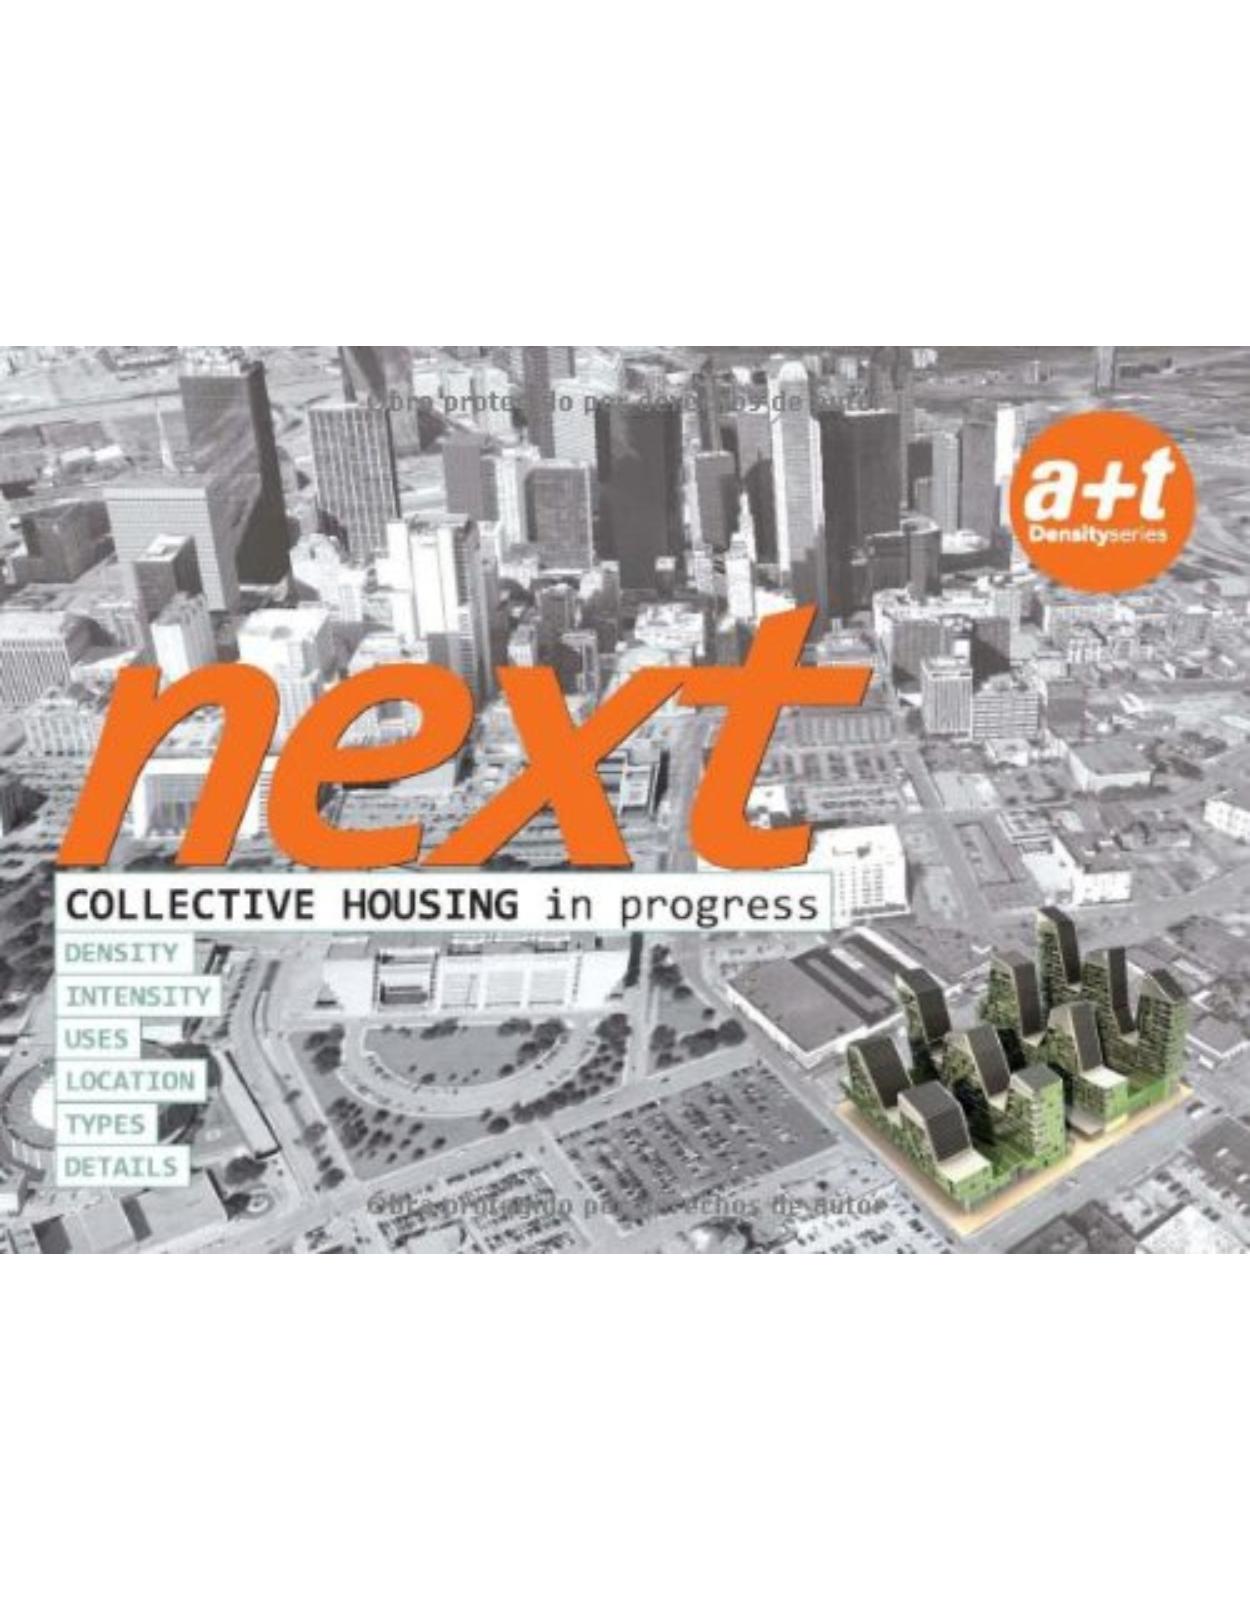 Next: Collective Housing in Progress 